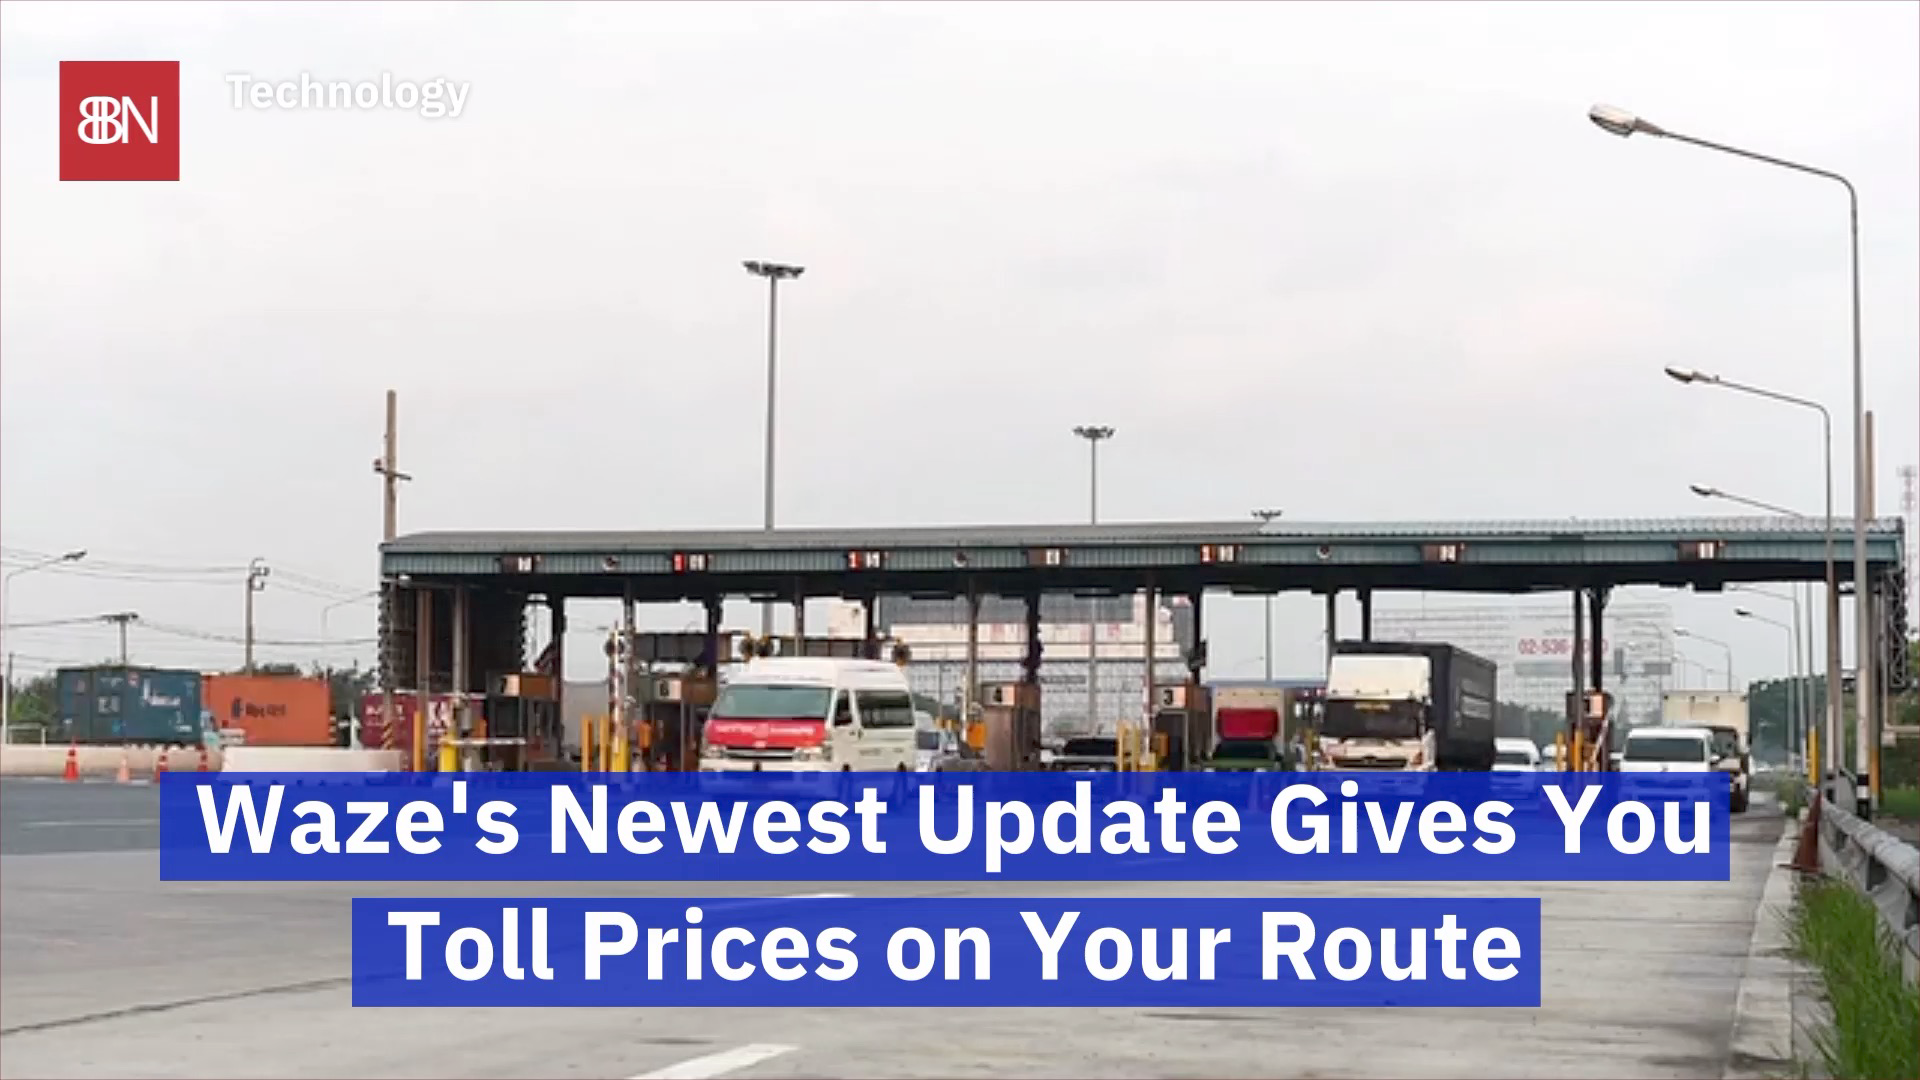 Watch Toll Prices In Real Time With Waze